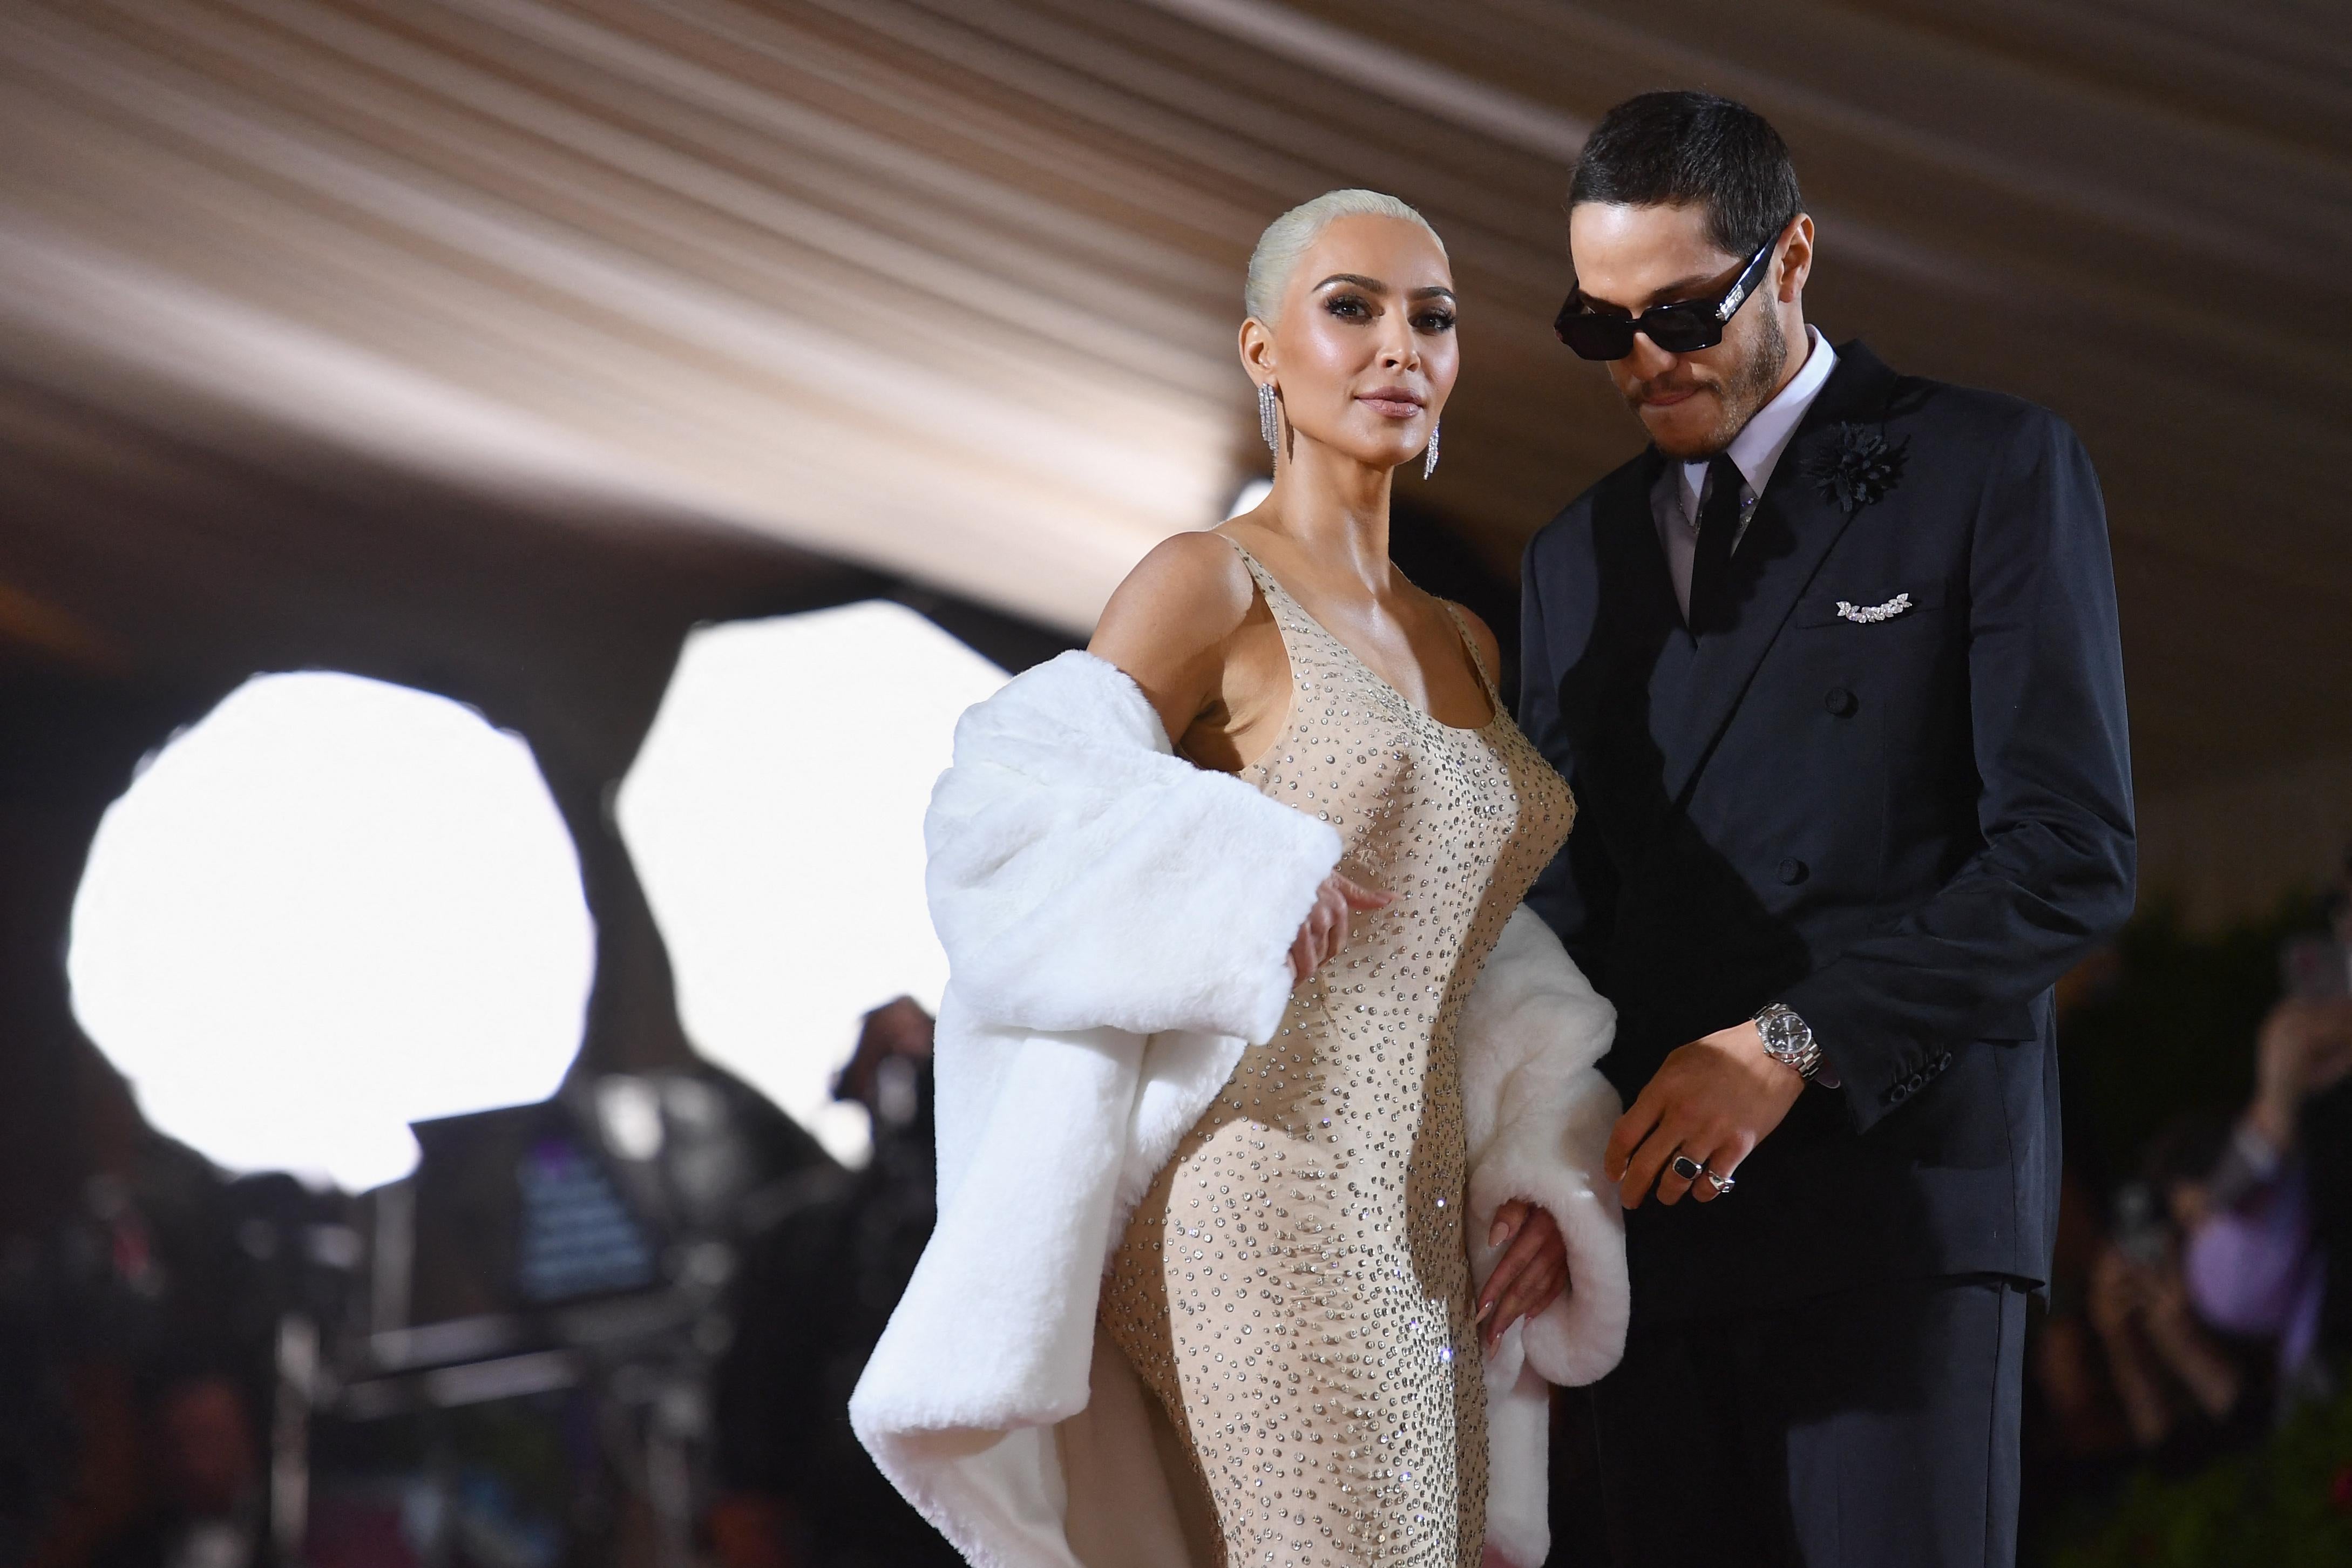 Kim Kardashian and Pete Davidson at the Met Gala at the Metropolitan Museum of Art on May 2, 2022, in New York. She wears a beige gown with a fur stole and he wears a suit and sunglasses.